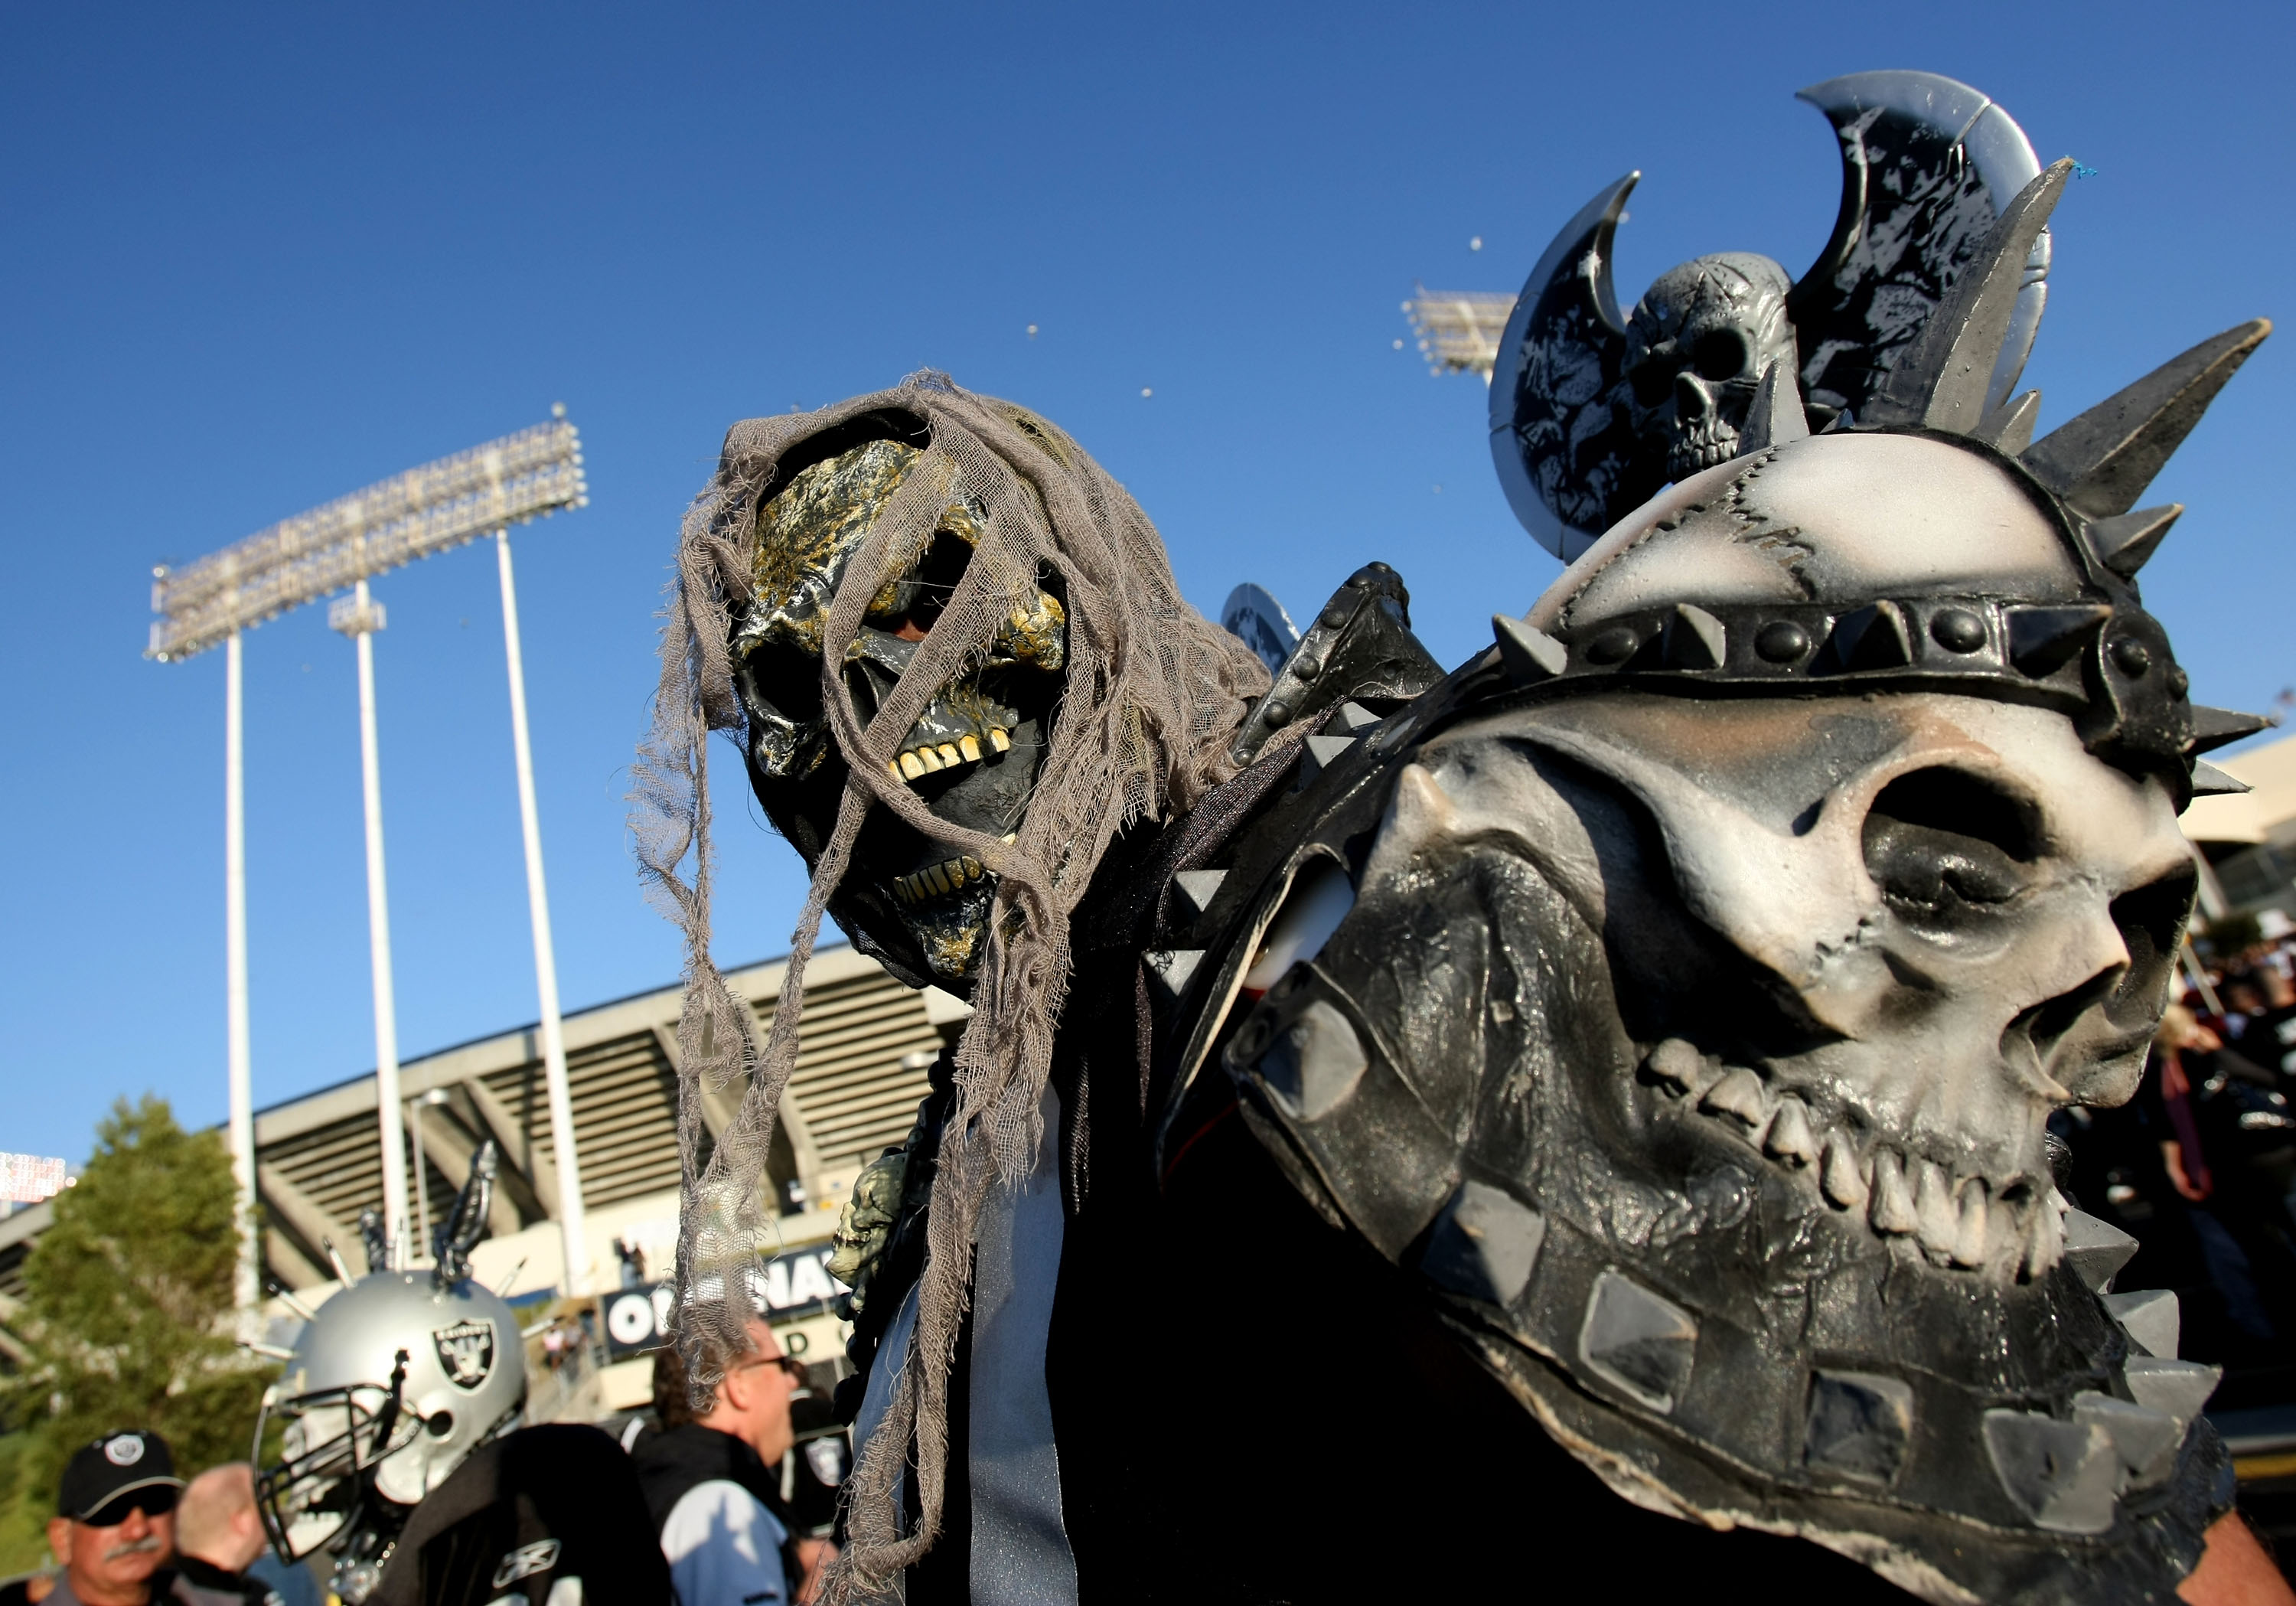 OAKLAND, CA - SEPTEMBER 08:  An Oakland Raider fan walks around the stadium before the Denver Broncos and the Oakland Raiders NFL game at McAfee Coliseum on September 8, 2008 in Oakland, California.  (Photo by Jed Jacobsohn/Getty Images)